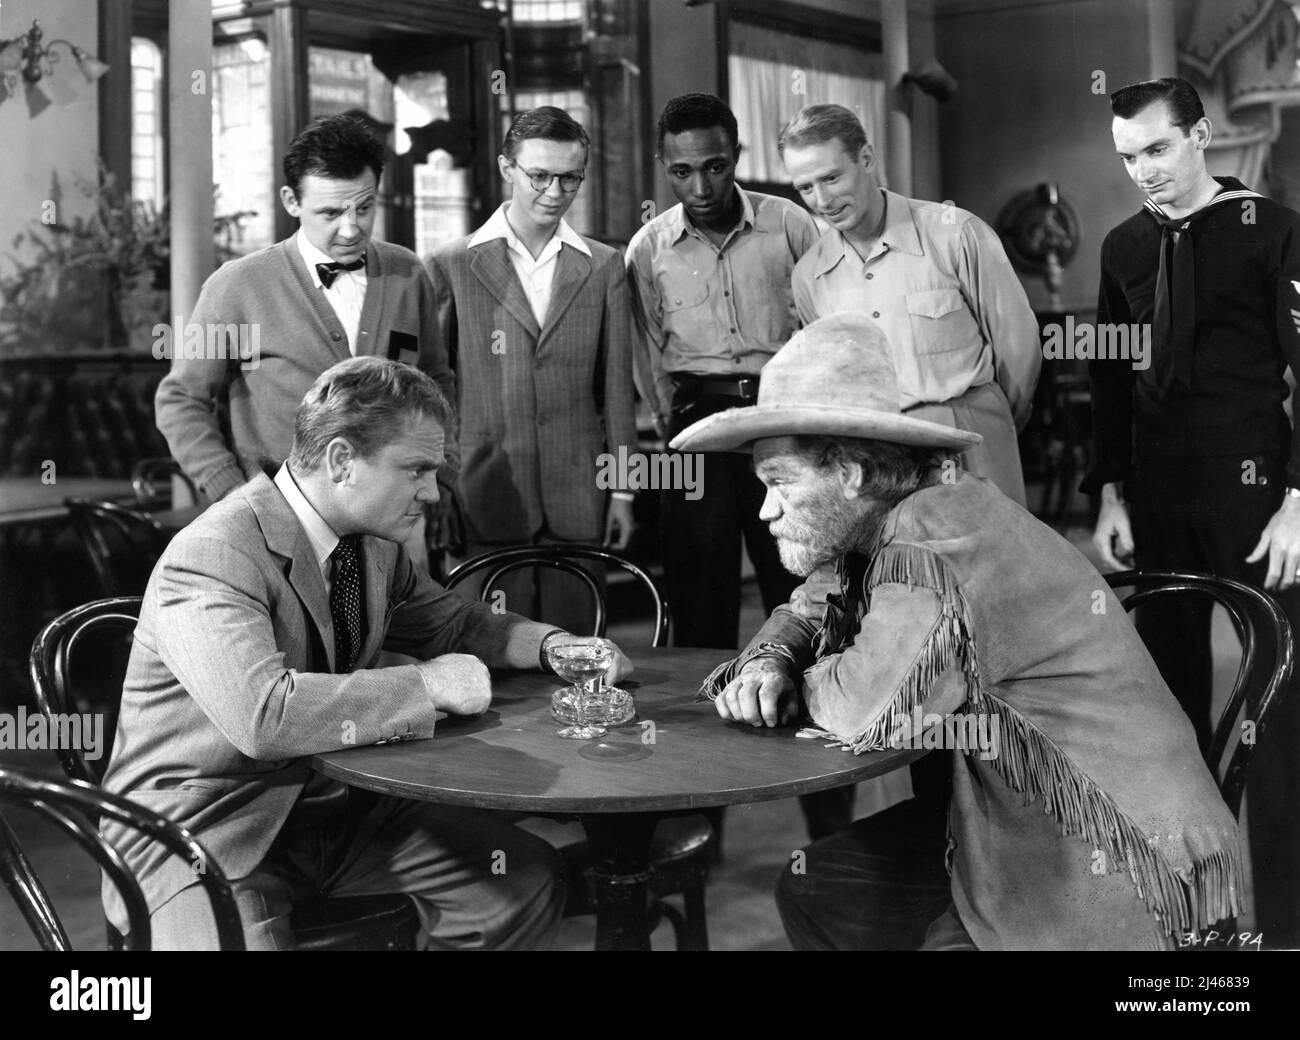 JAMES CAGNEY and JAMES BARTON in THE TIME OF YOUR LIFE 1948 director H.C. POTTER Pulitzer Prize play William Saroyan adaptation Nathaniel Curtis William Cagney Productions / United Artists Stock Photo